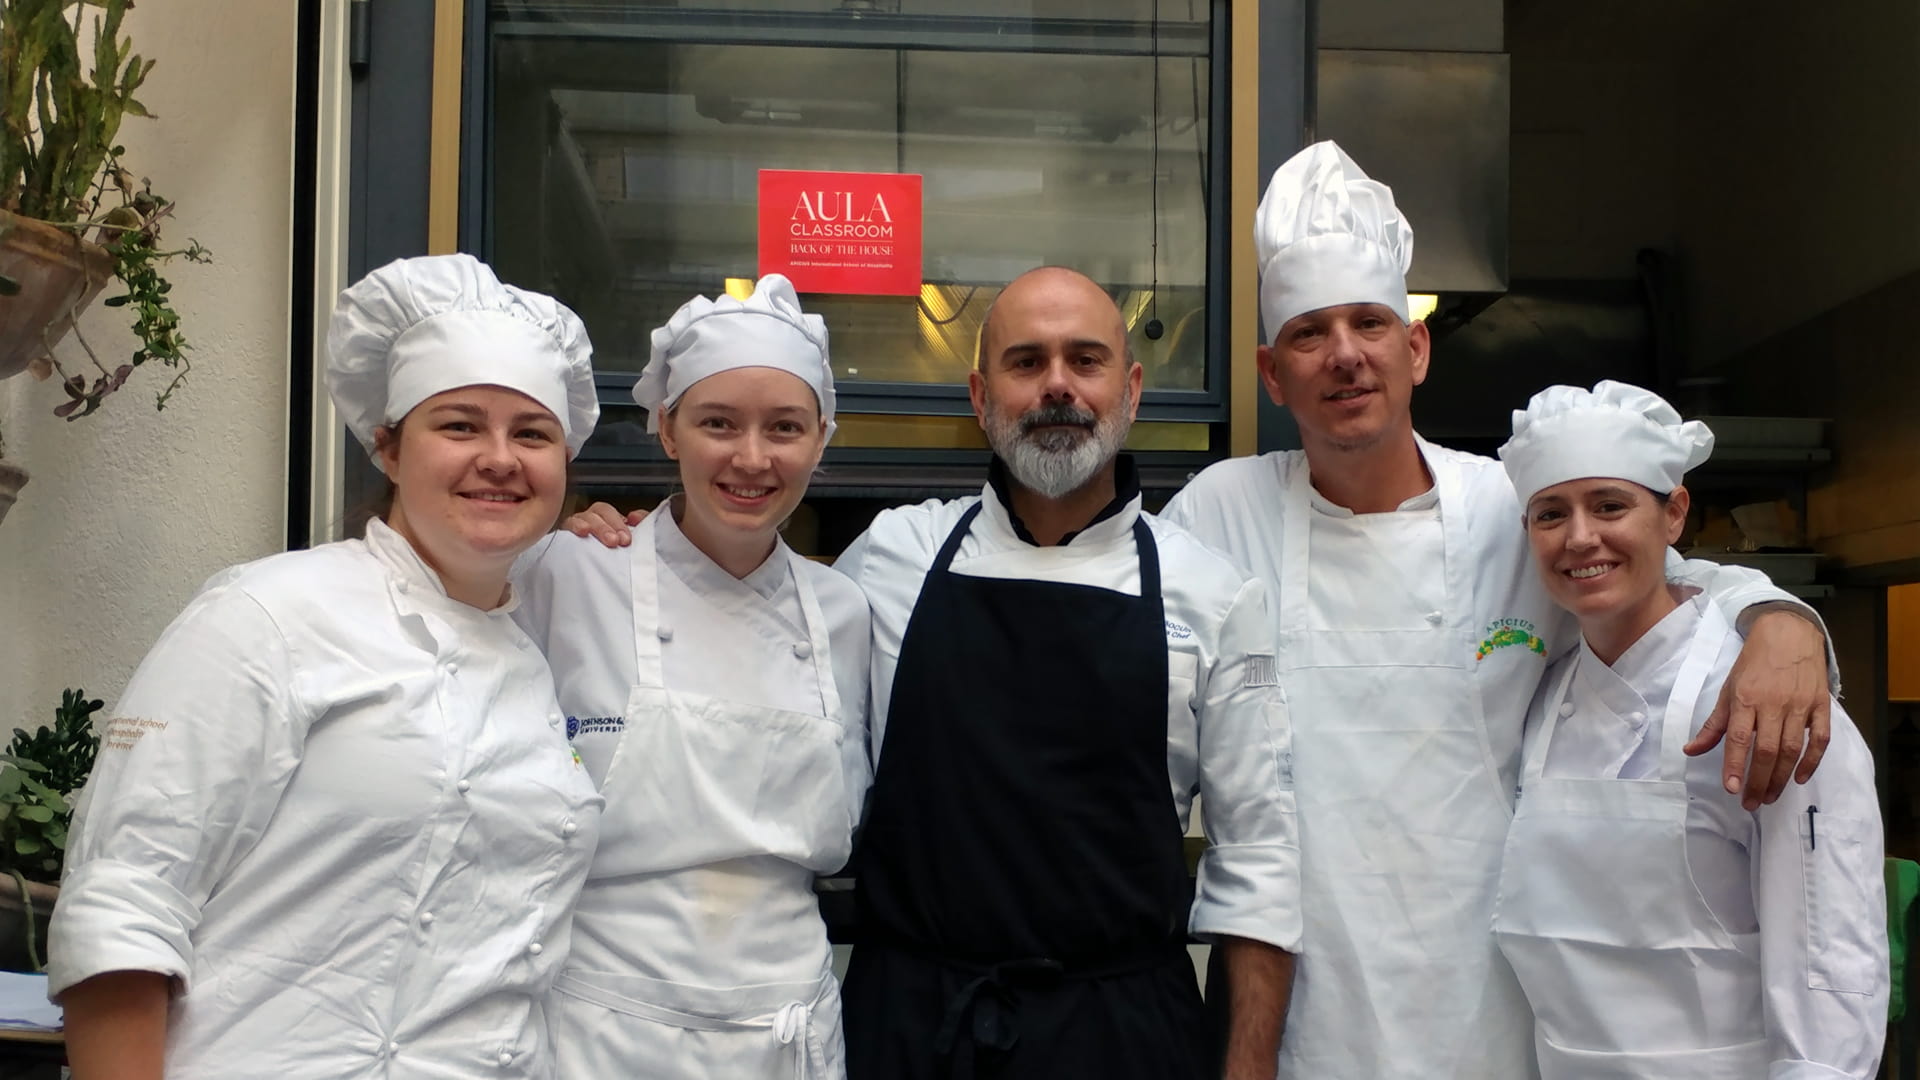 JWU Denver student Kenny Sargent in Italy with fellow JWU students Sarah Hegge, Cora Gaines and Kate Ethridge. (Chef Massimo Bocus in the center.)